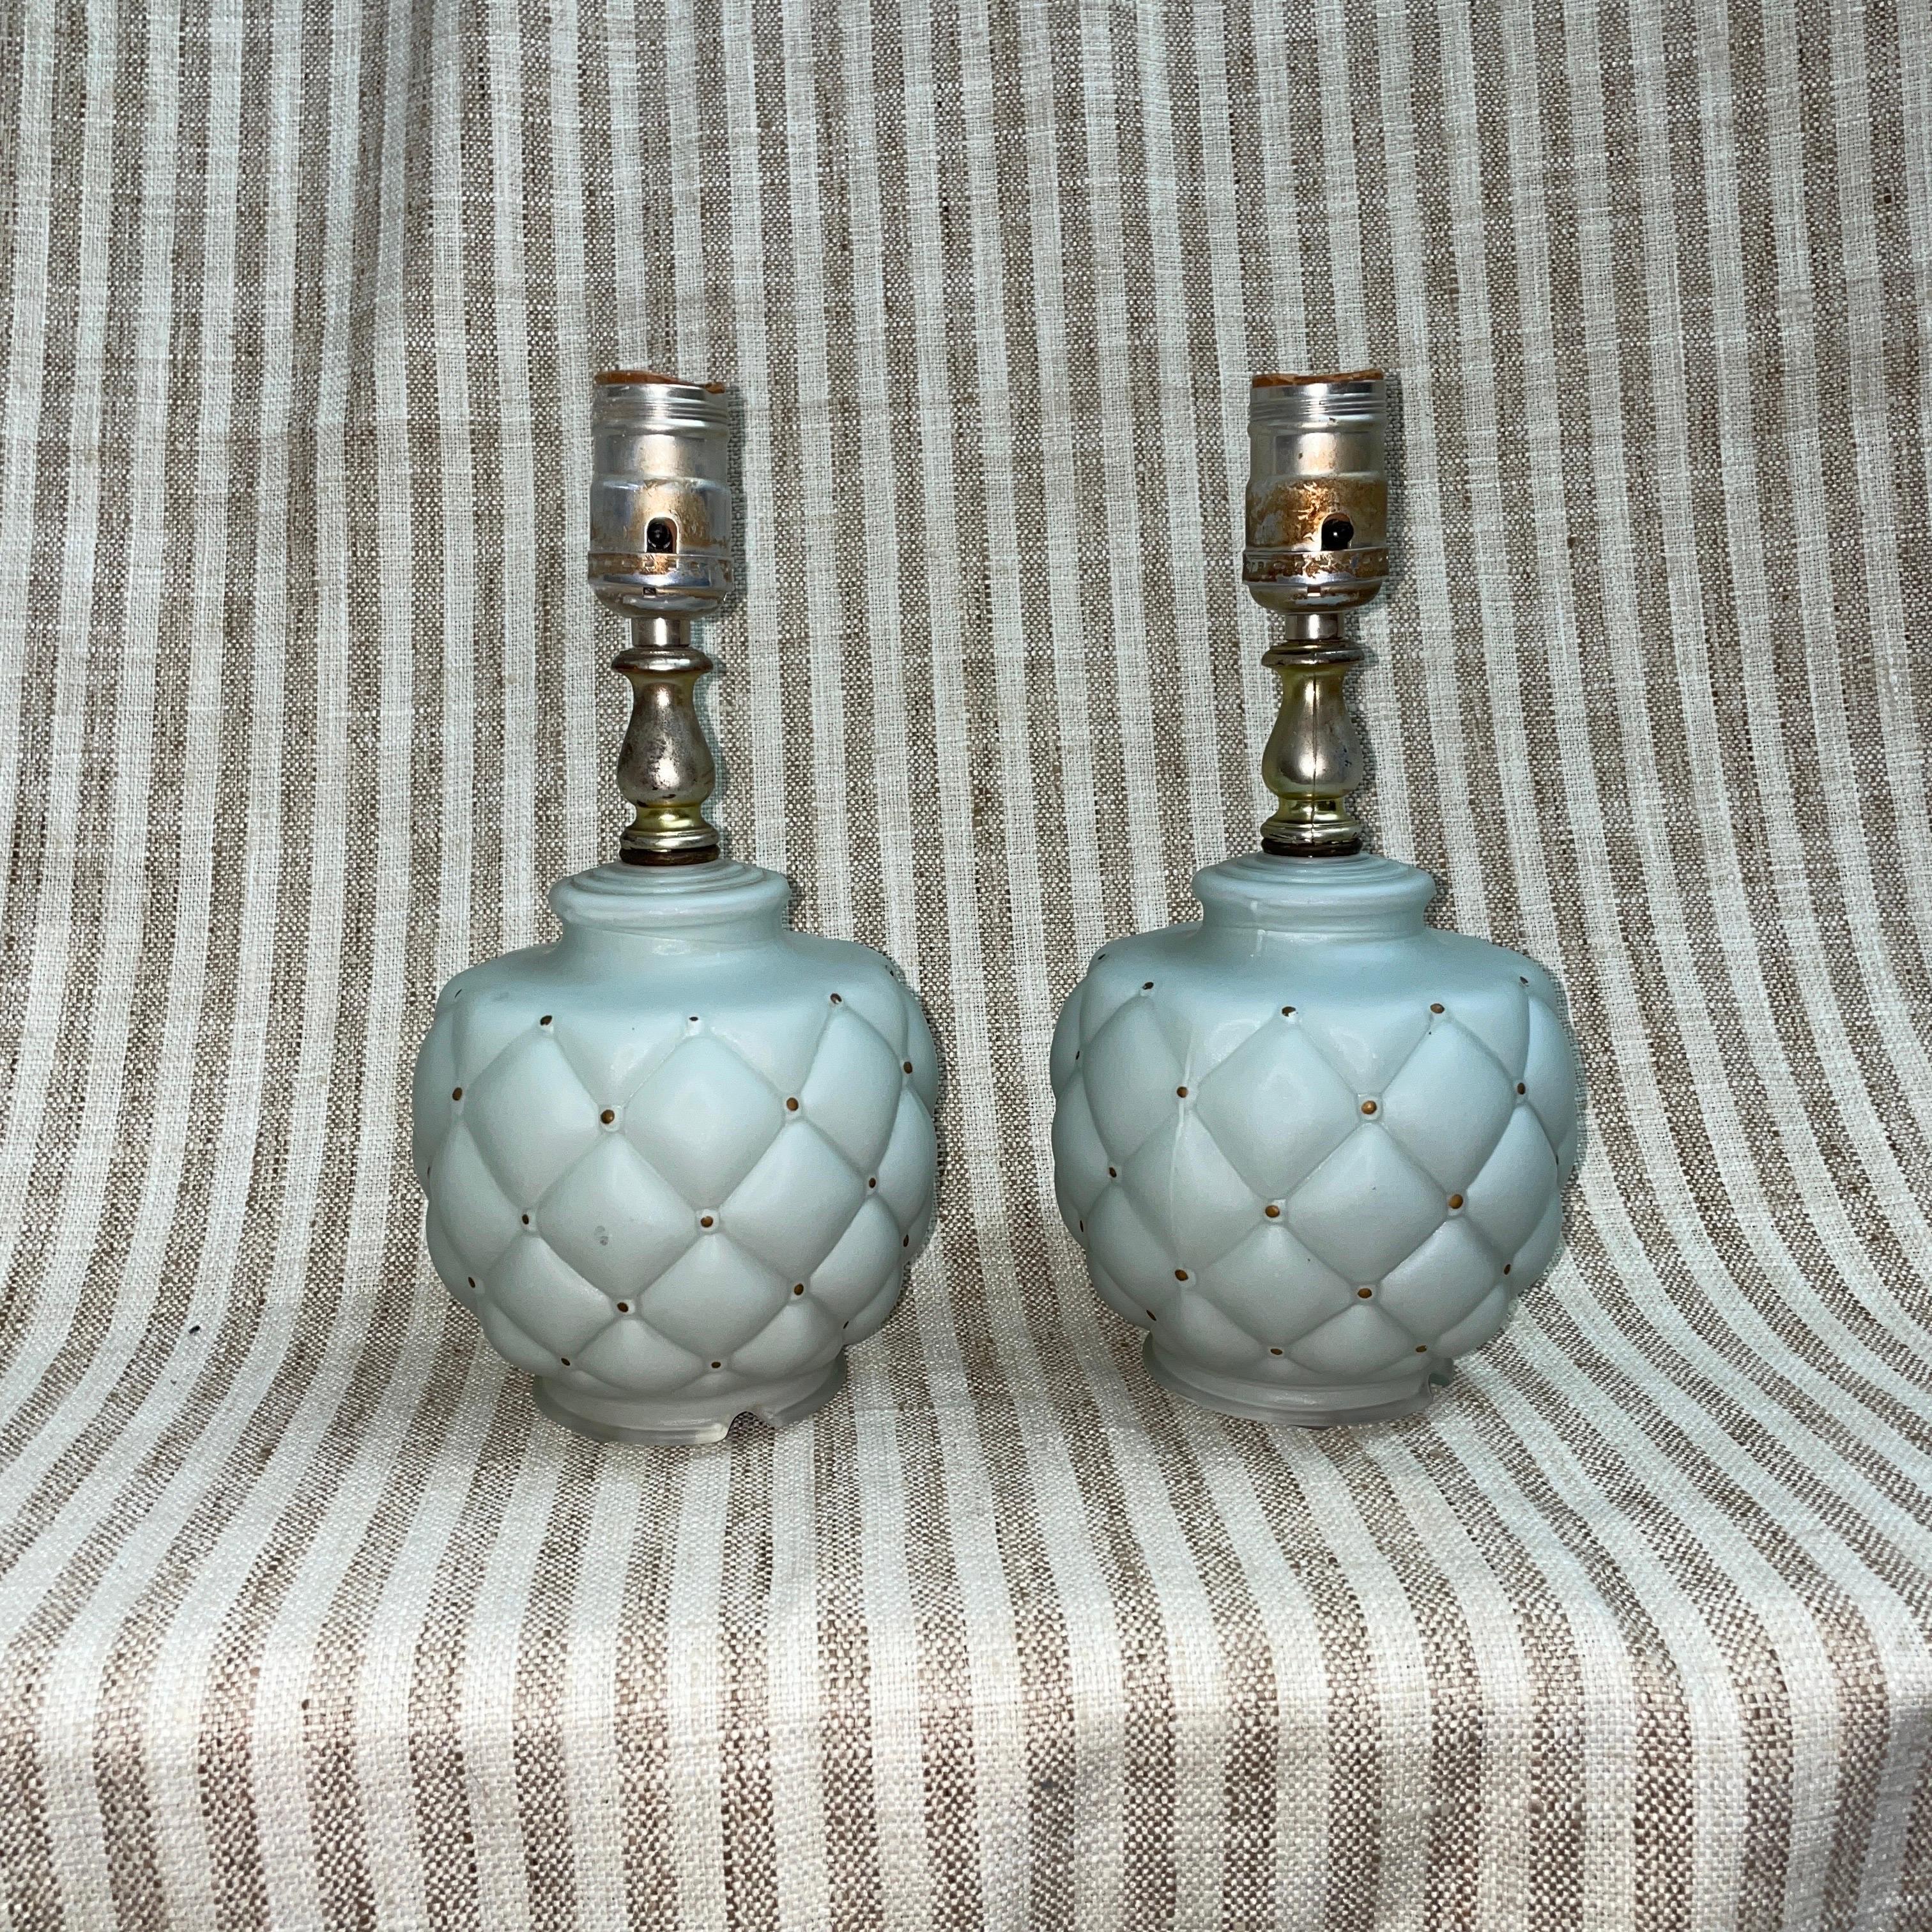 A pair of blue glass table lamps that would be perfect for a small table or nightstand. The lamps are baby blue with a gold paint dotted along the quilt-like surface. Unmarked. Original cord which is still in good shape. Both lamps work perfectly.